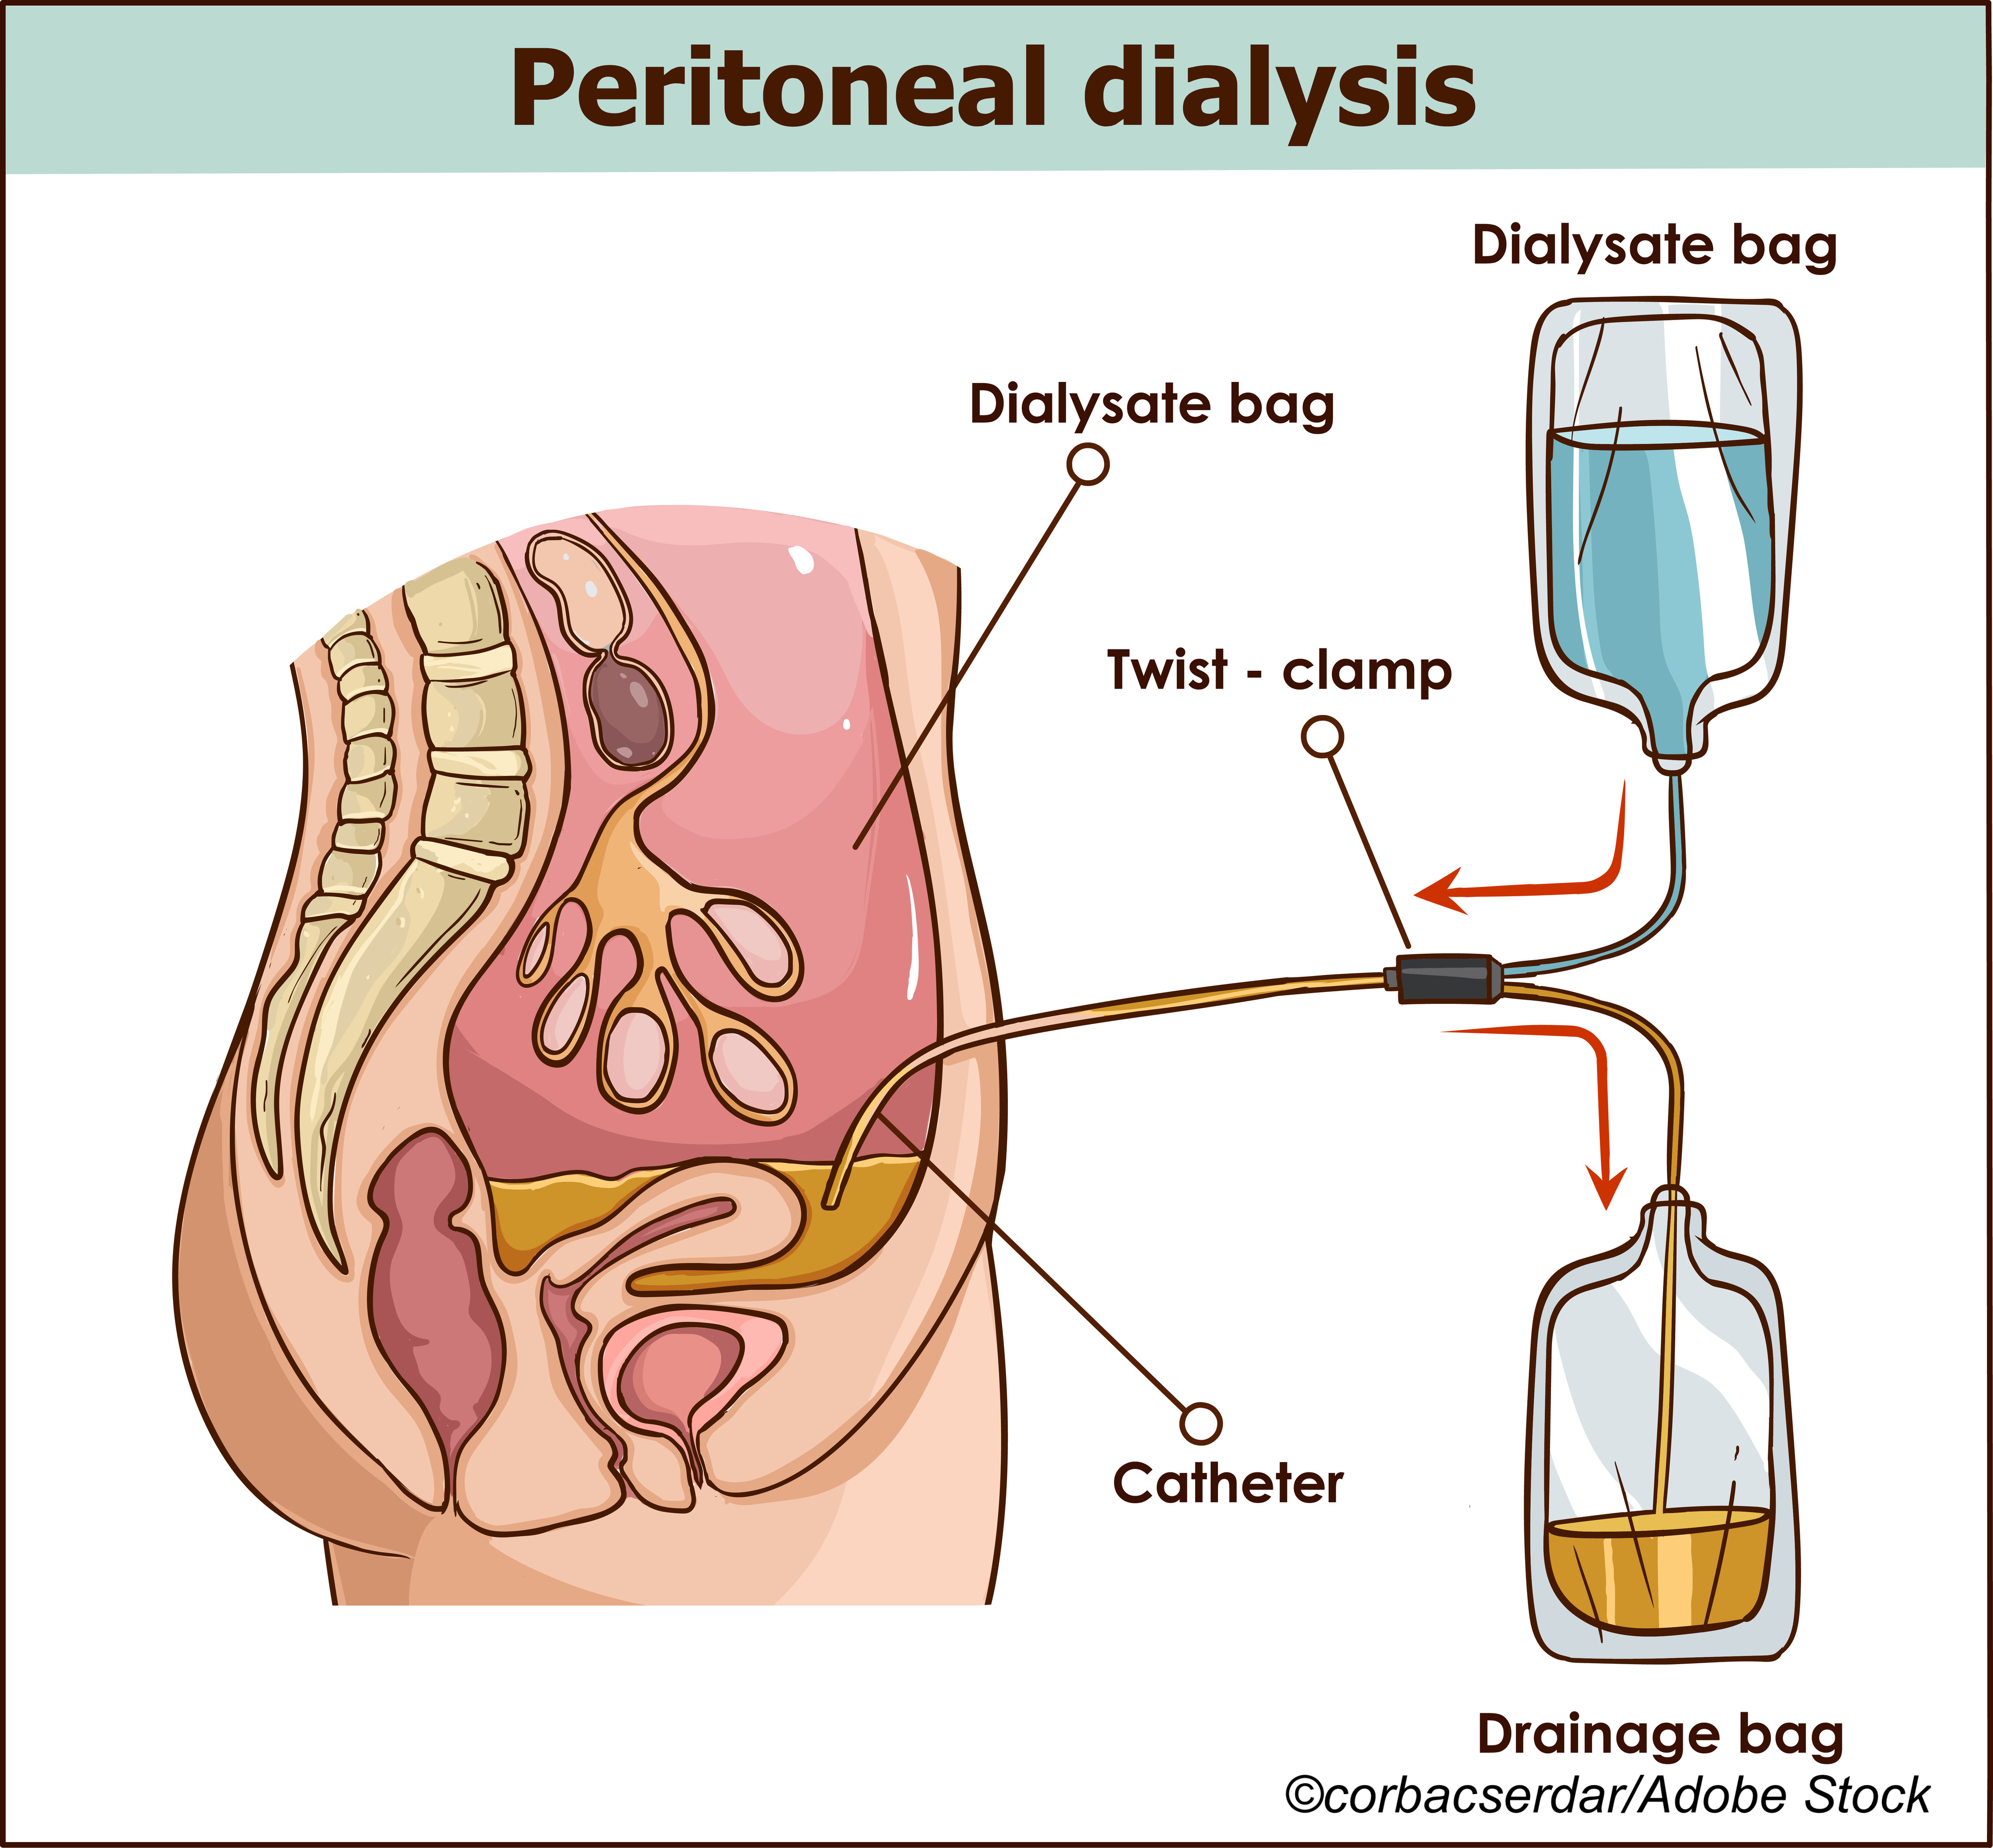 Kidney Failure: Common Gene Variant Associated with Decreased Ultrafiltration Portends Poor Outcome with Peritoneal Dialysis